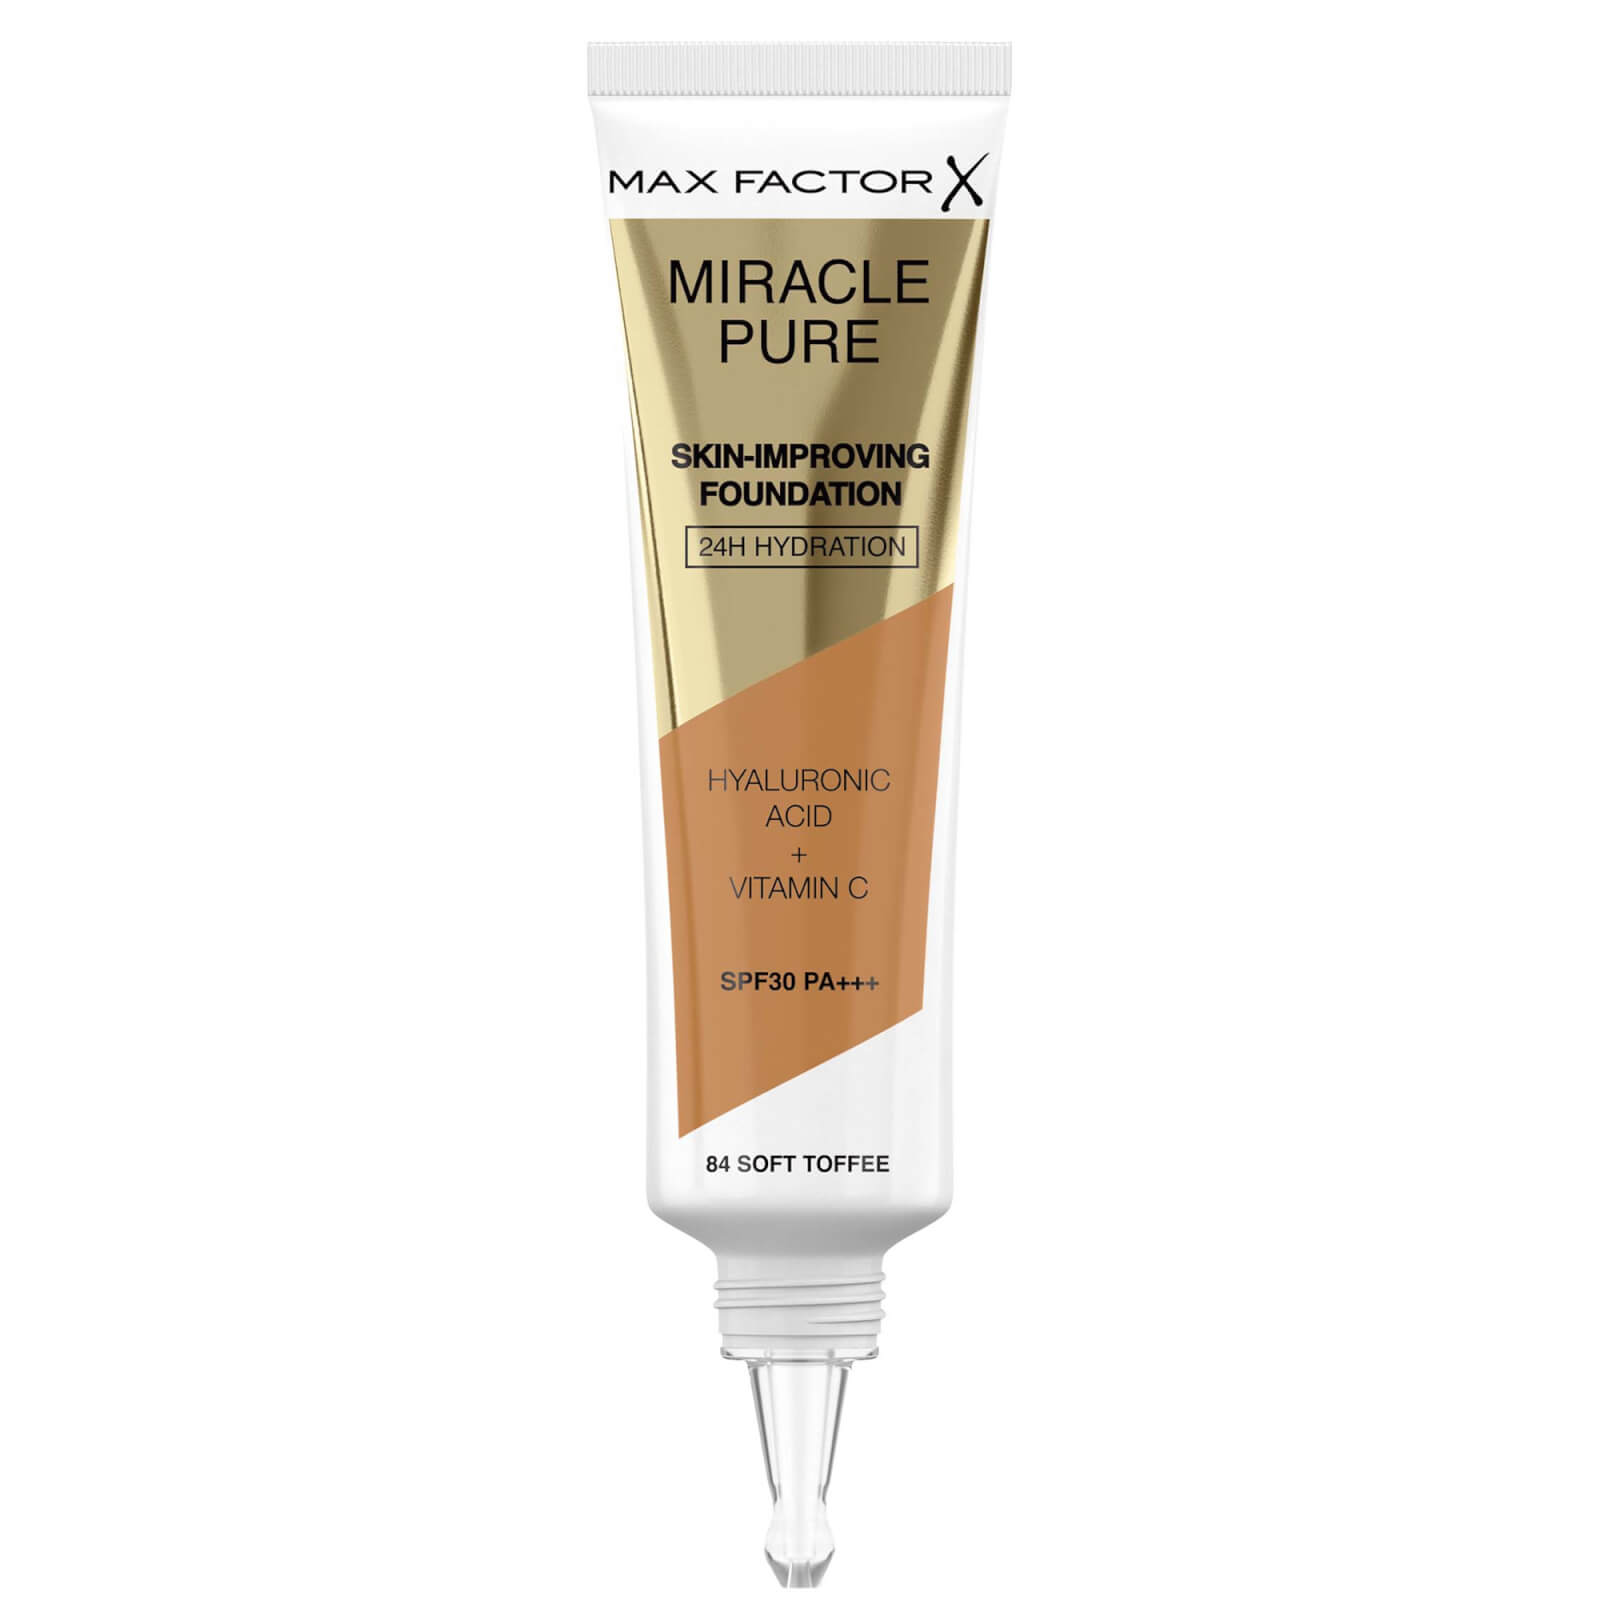 Max Factor Miracle Pure Skin Improving Foundation 30ml (Various Shades) - Soft Toffee